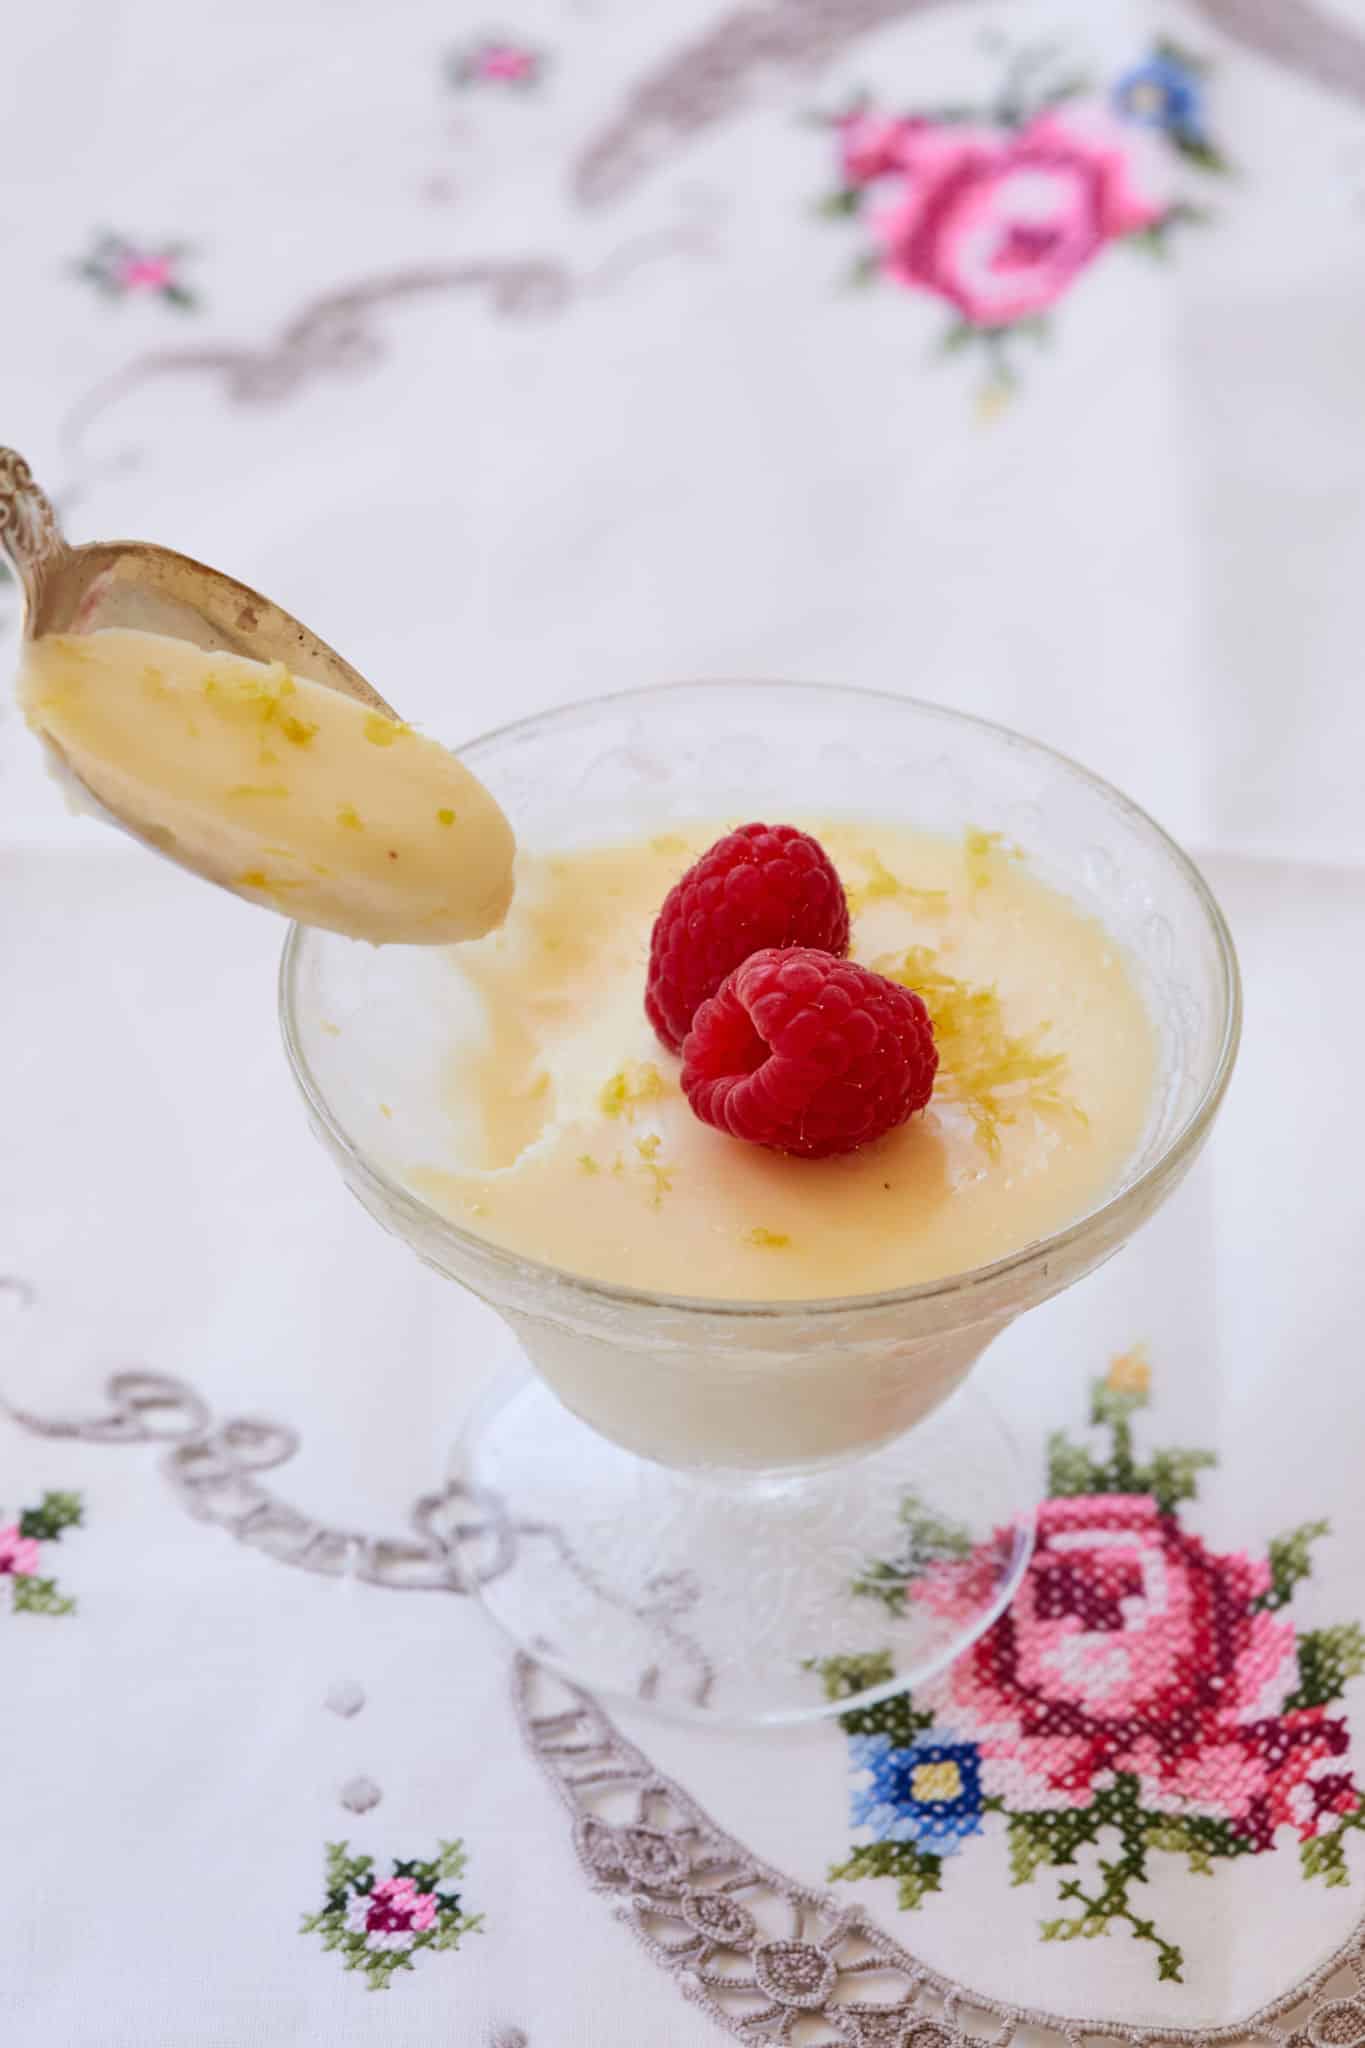 A spoon taking some Lemon Posset out of a dish.